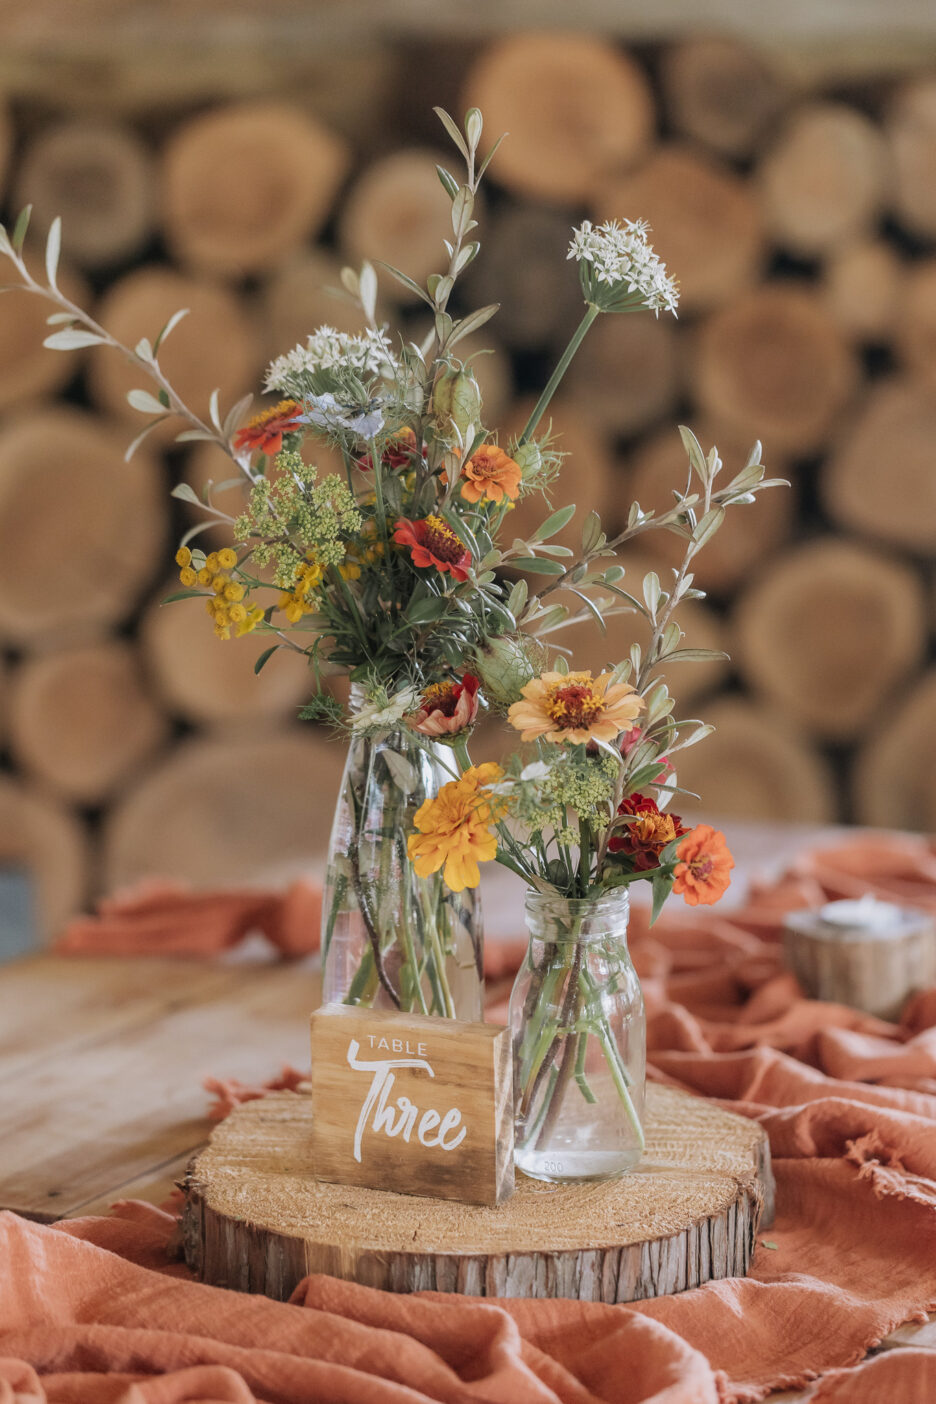 Wedding reception table flowers in glass jars with rustic fabric and country colours